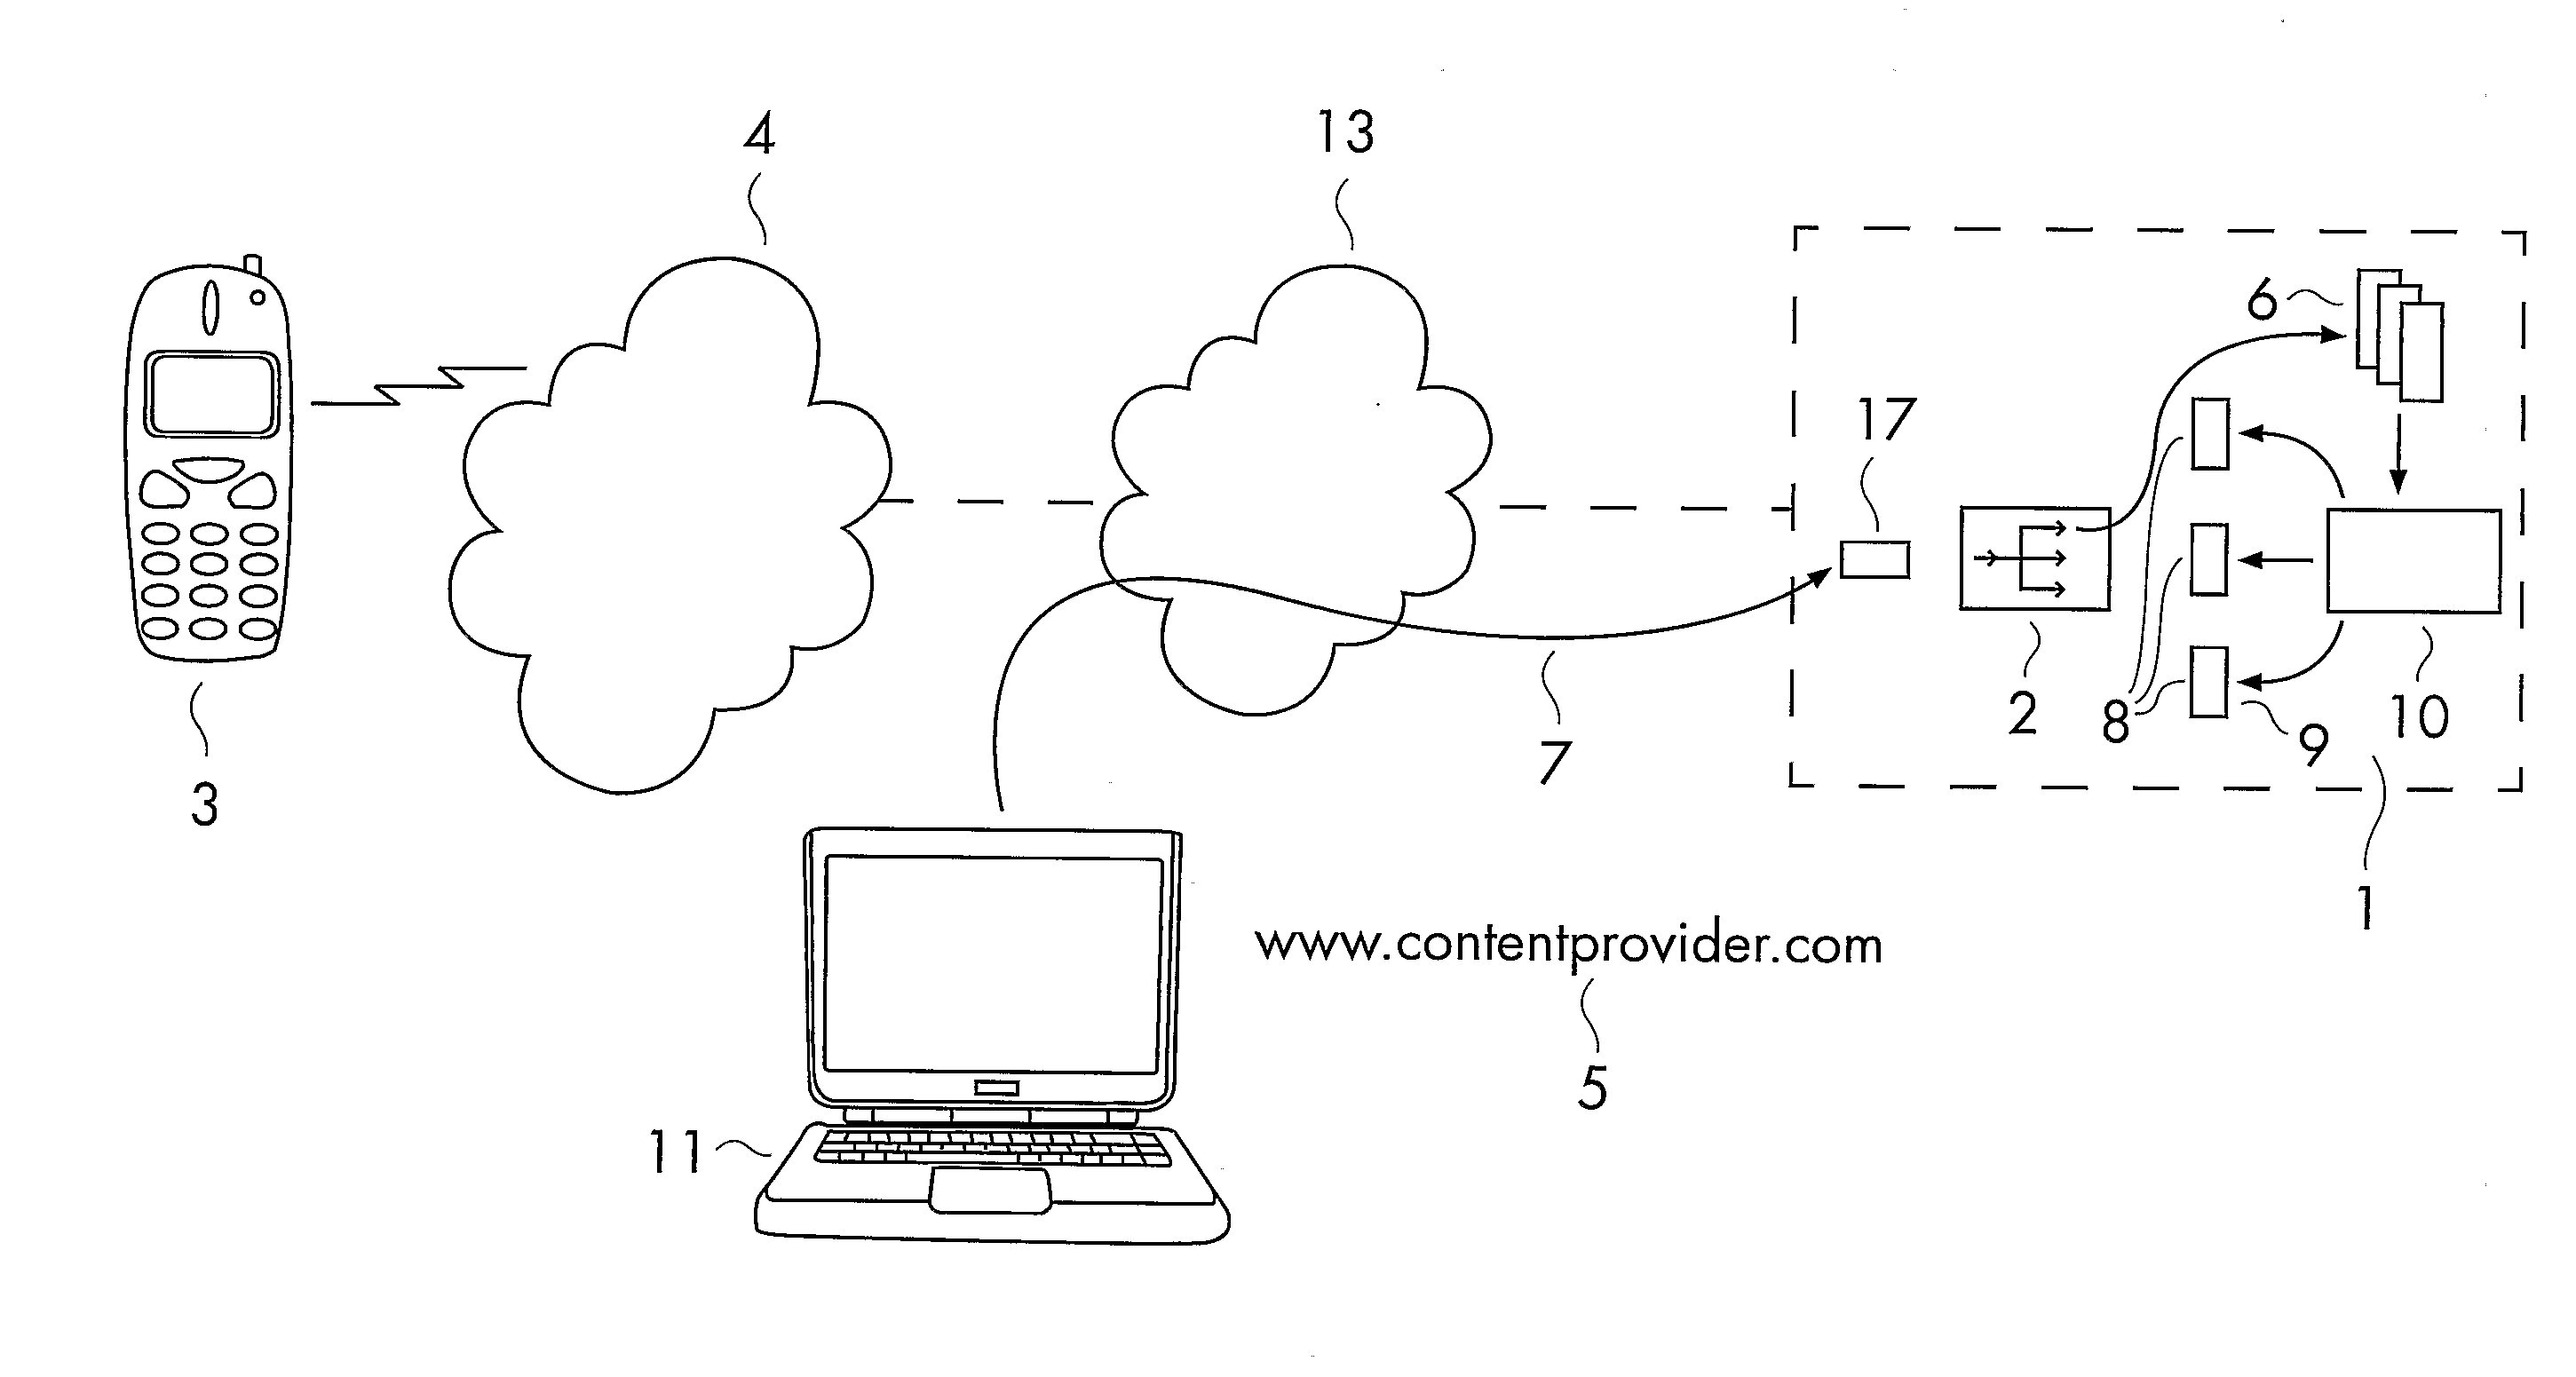 Terminal Independent Addressing System for Access to a Web Page Via a Public Mobile Network